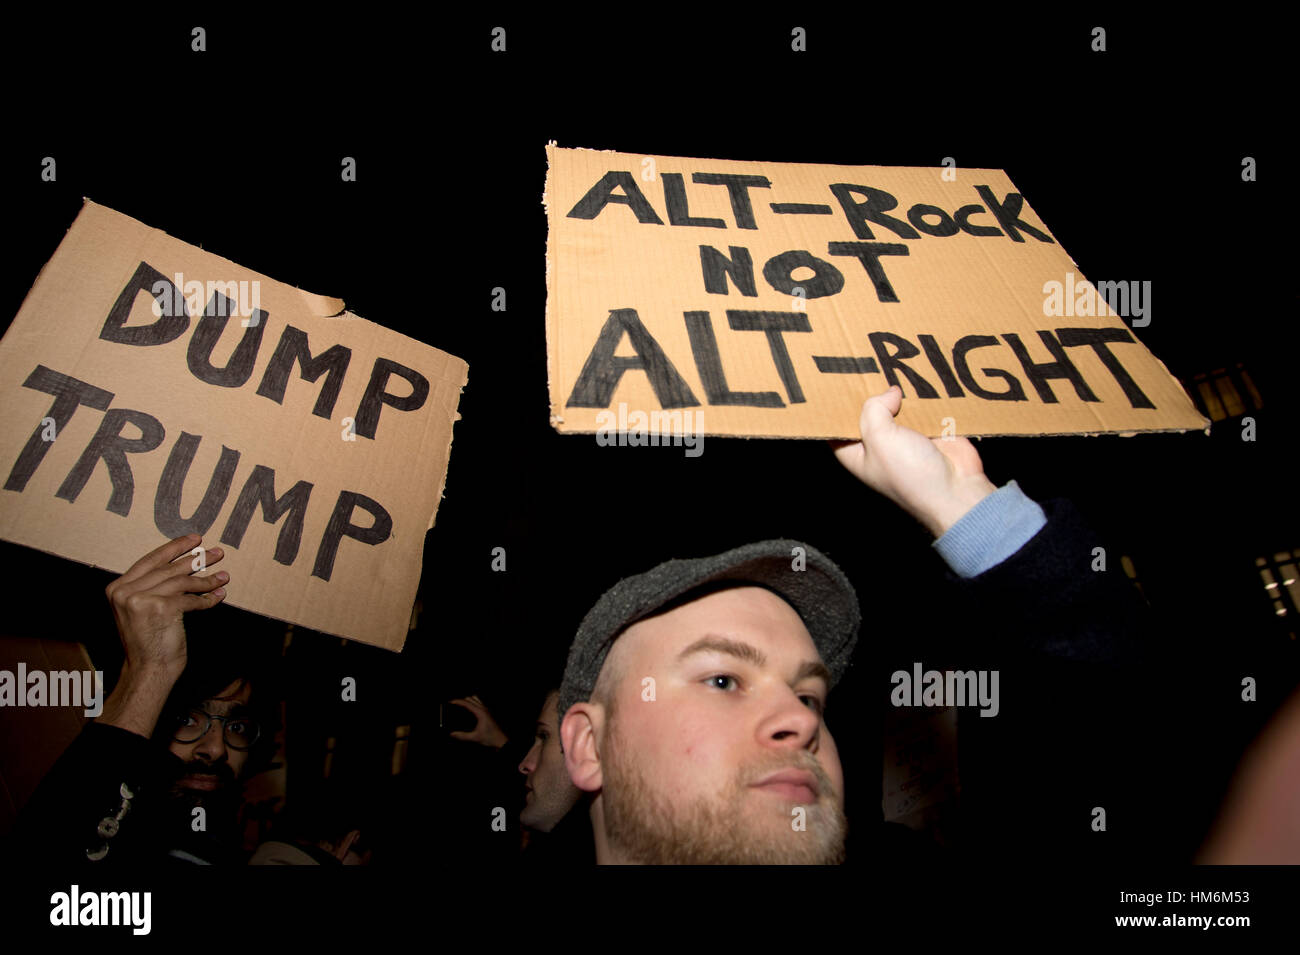 Protest against Donald Trump's travel ban on Muslims. Protesters hold  home-made cardboard signs. One says 'Dump Trump' and another says 'Alt rock' Stock Photo